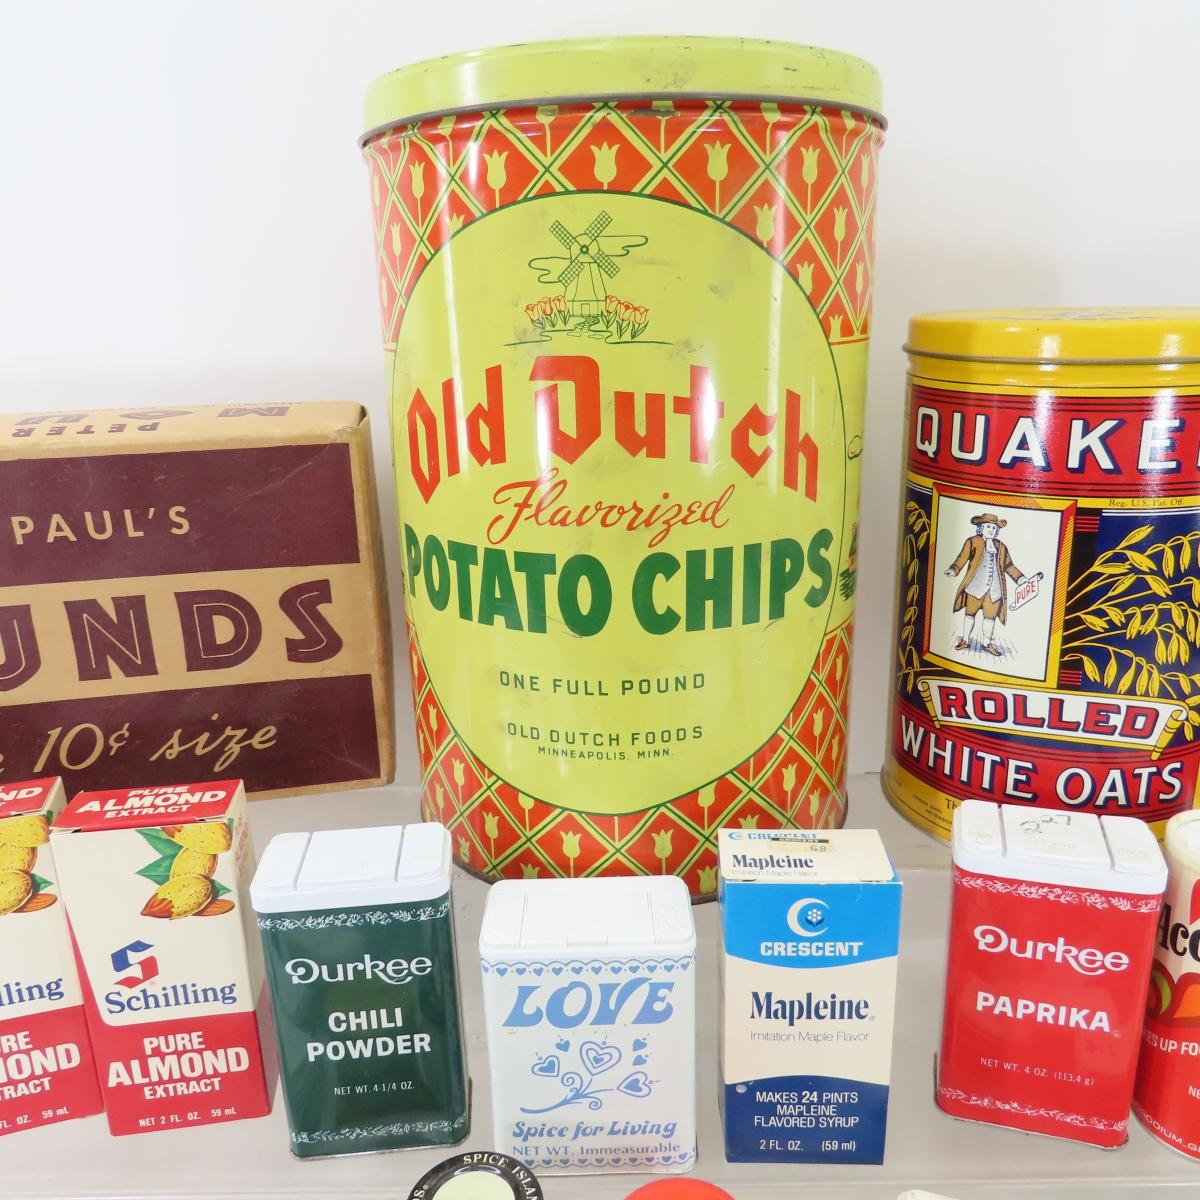 Antique Spice & Other Food & Cocoa Tins & Bottles